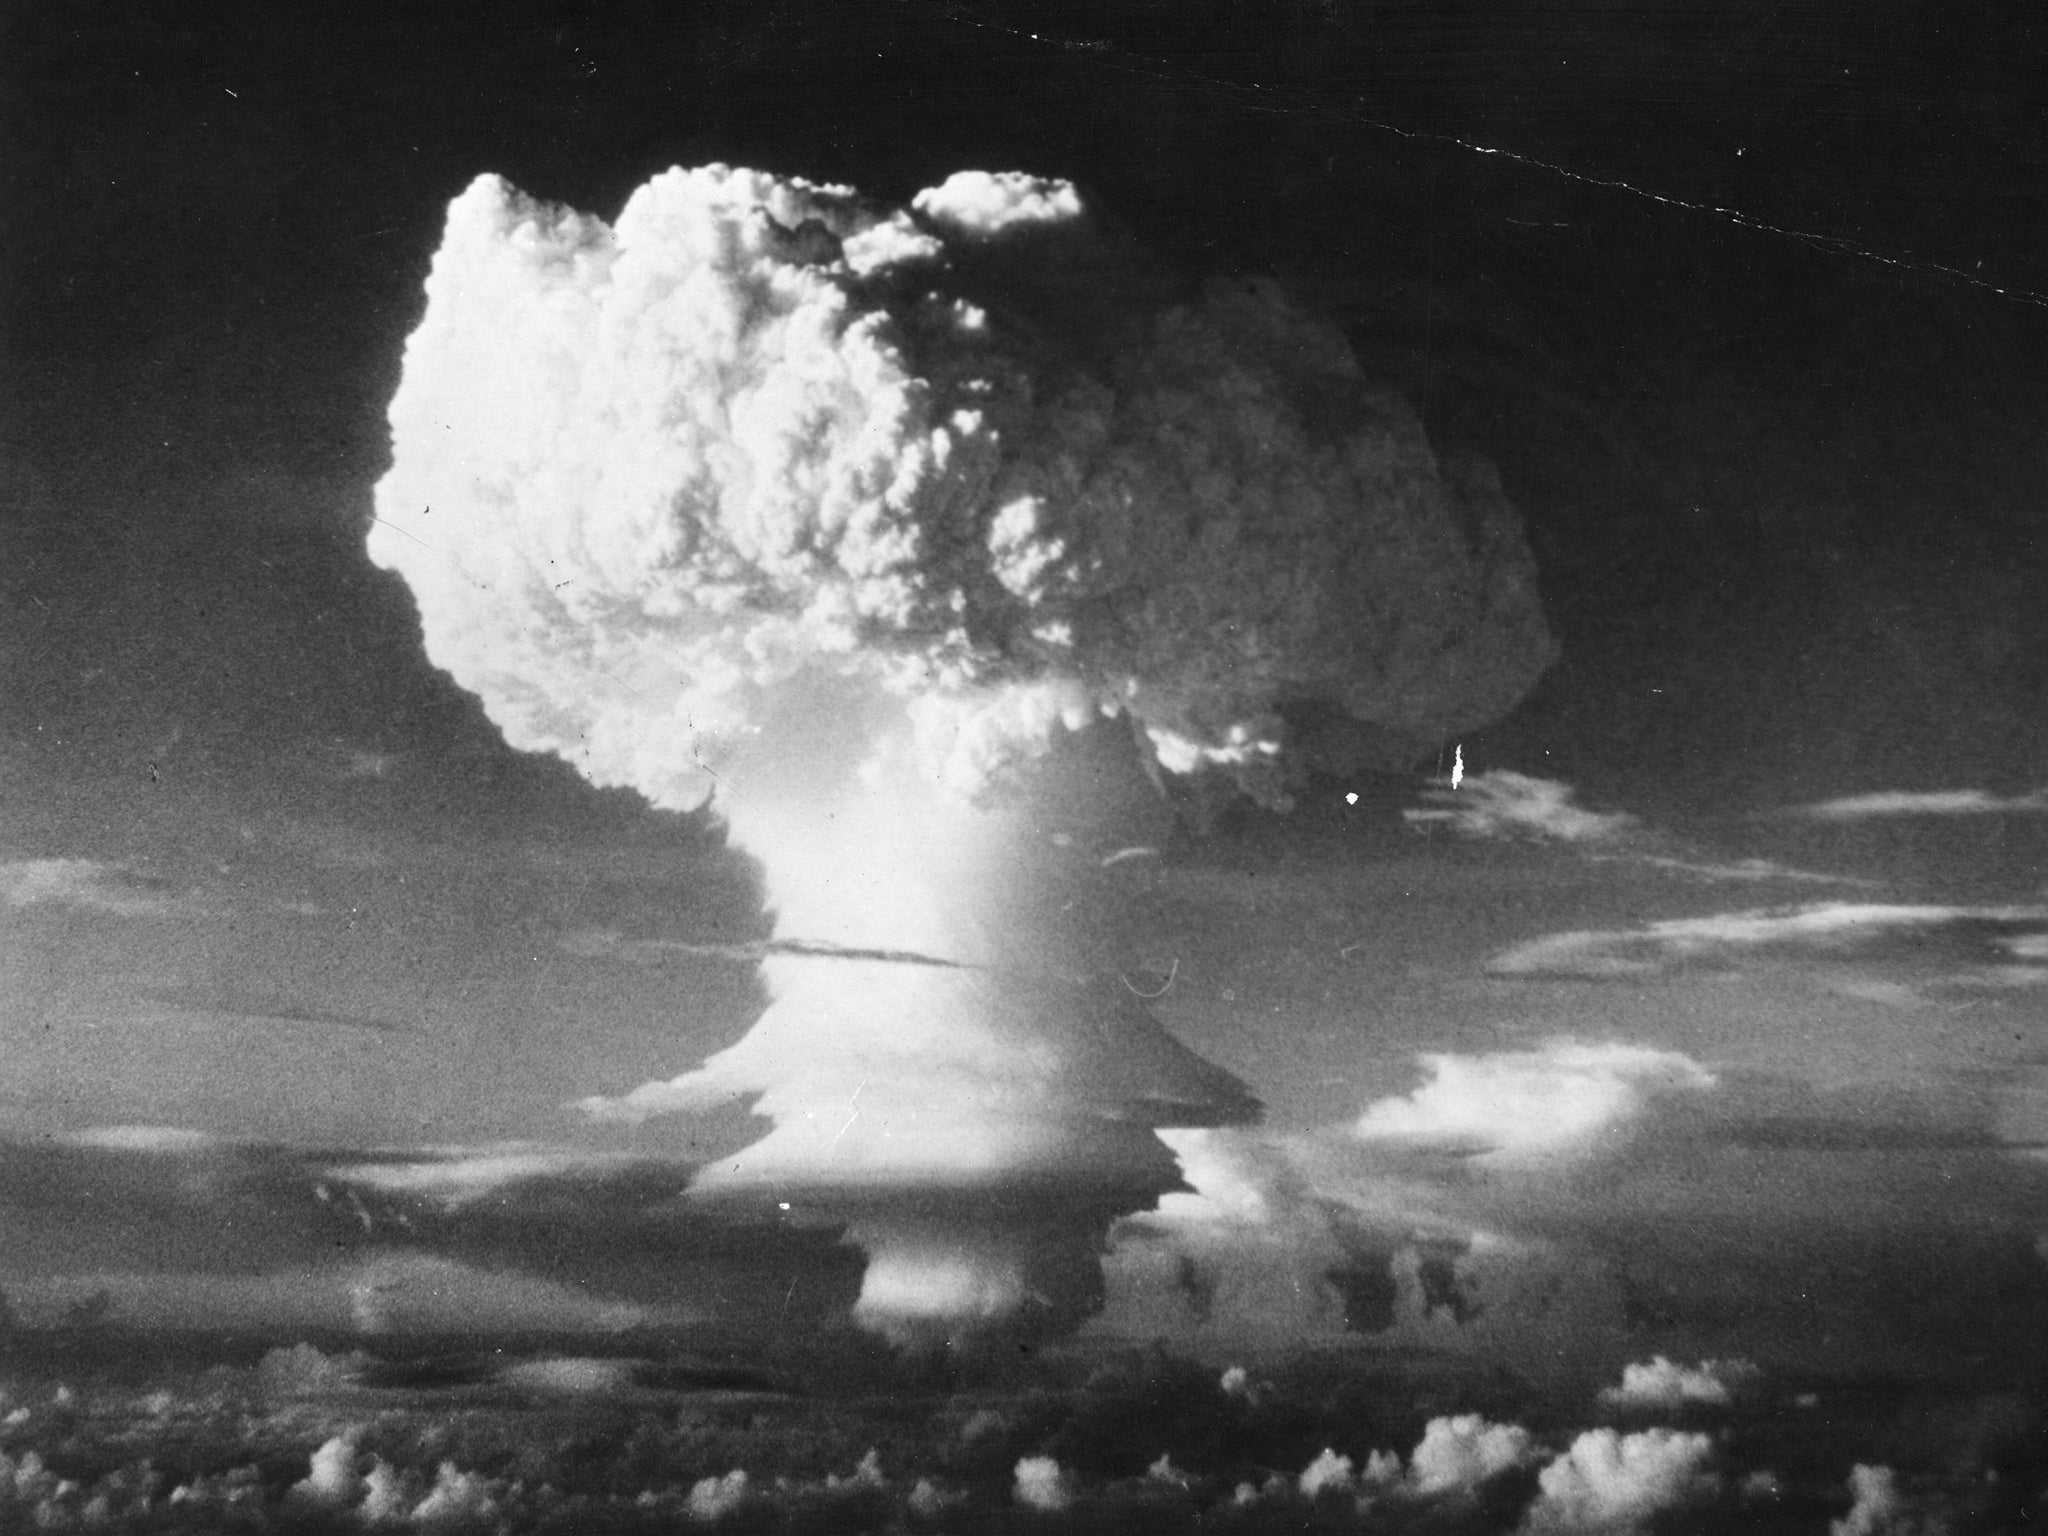 The start of the nuclear age began the 'Great Acceleration' of human progress